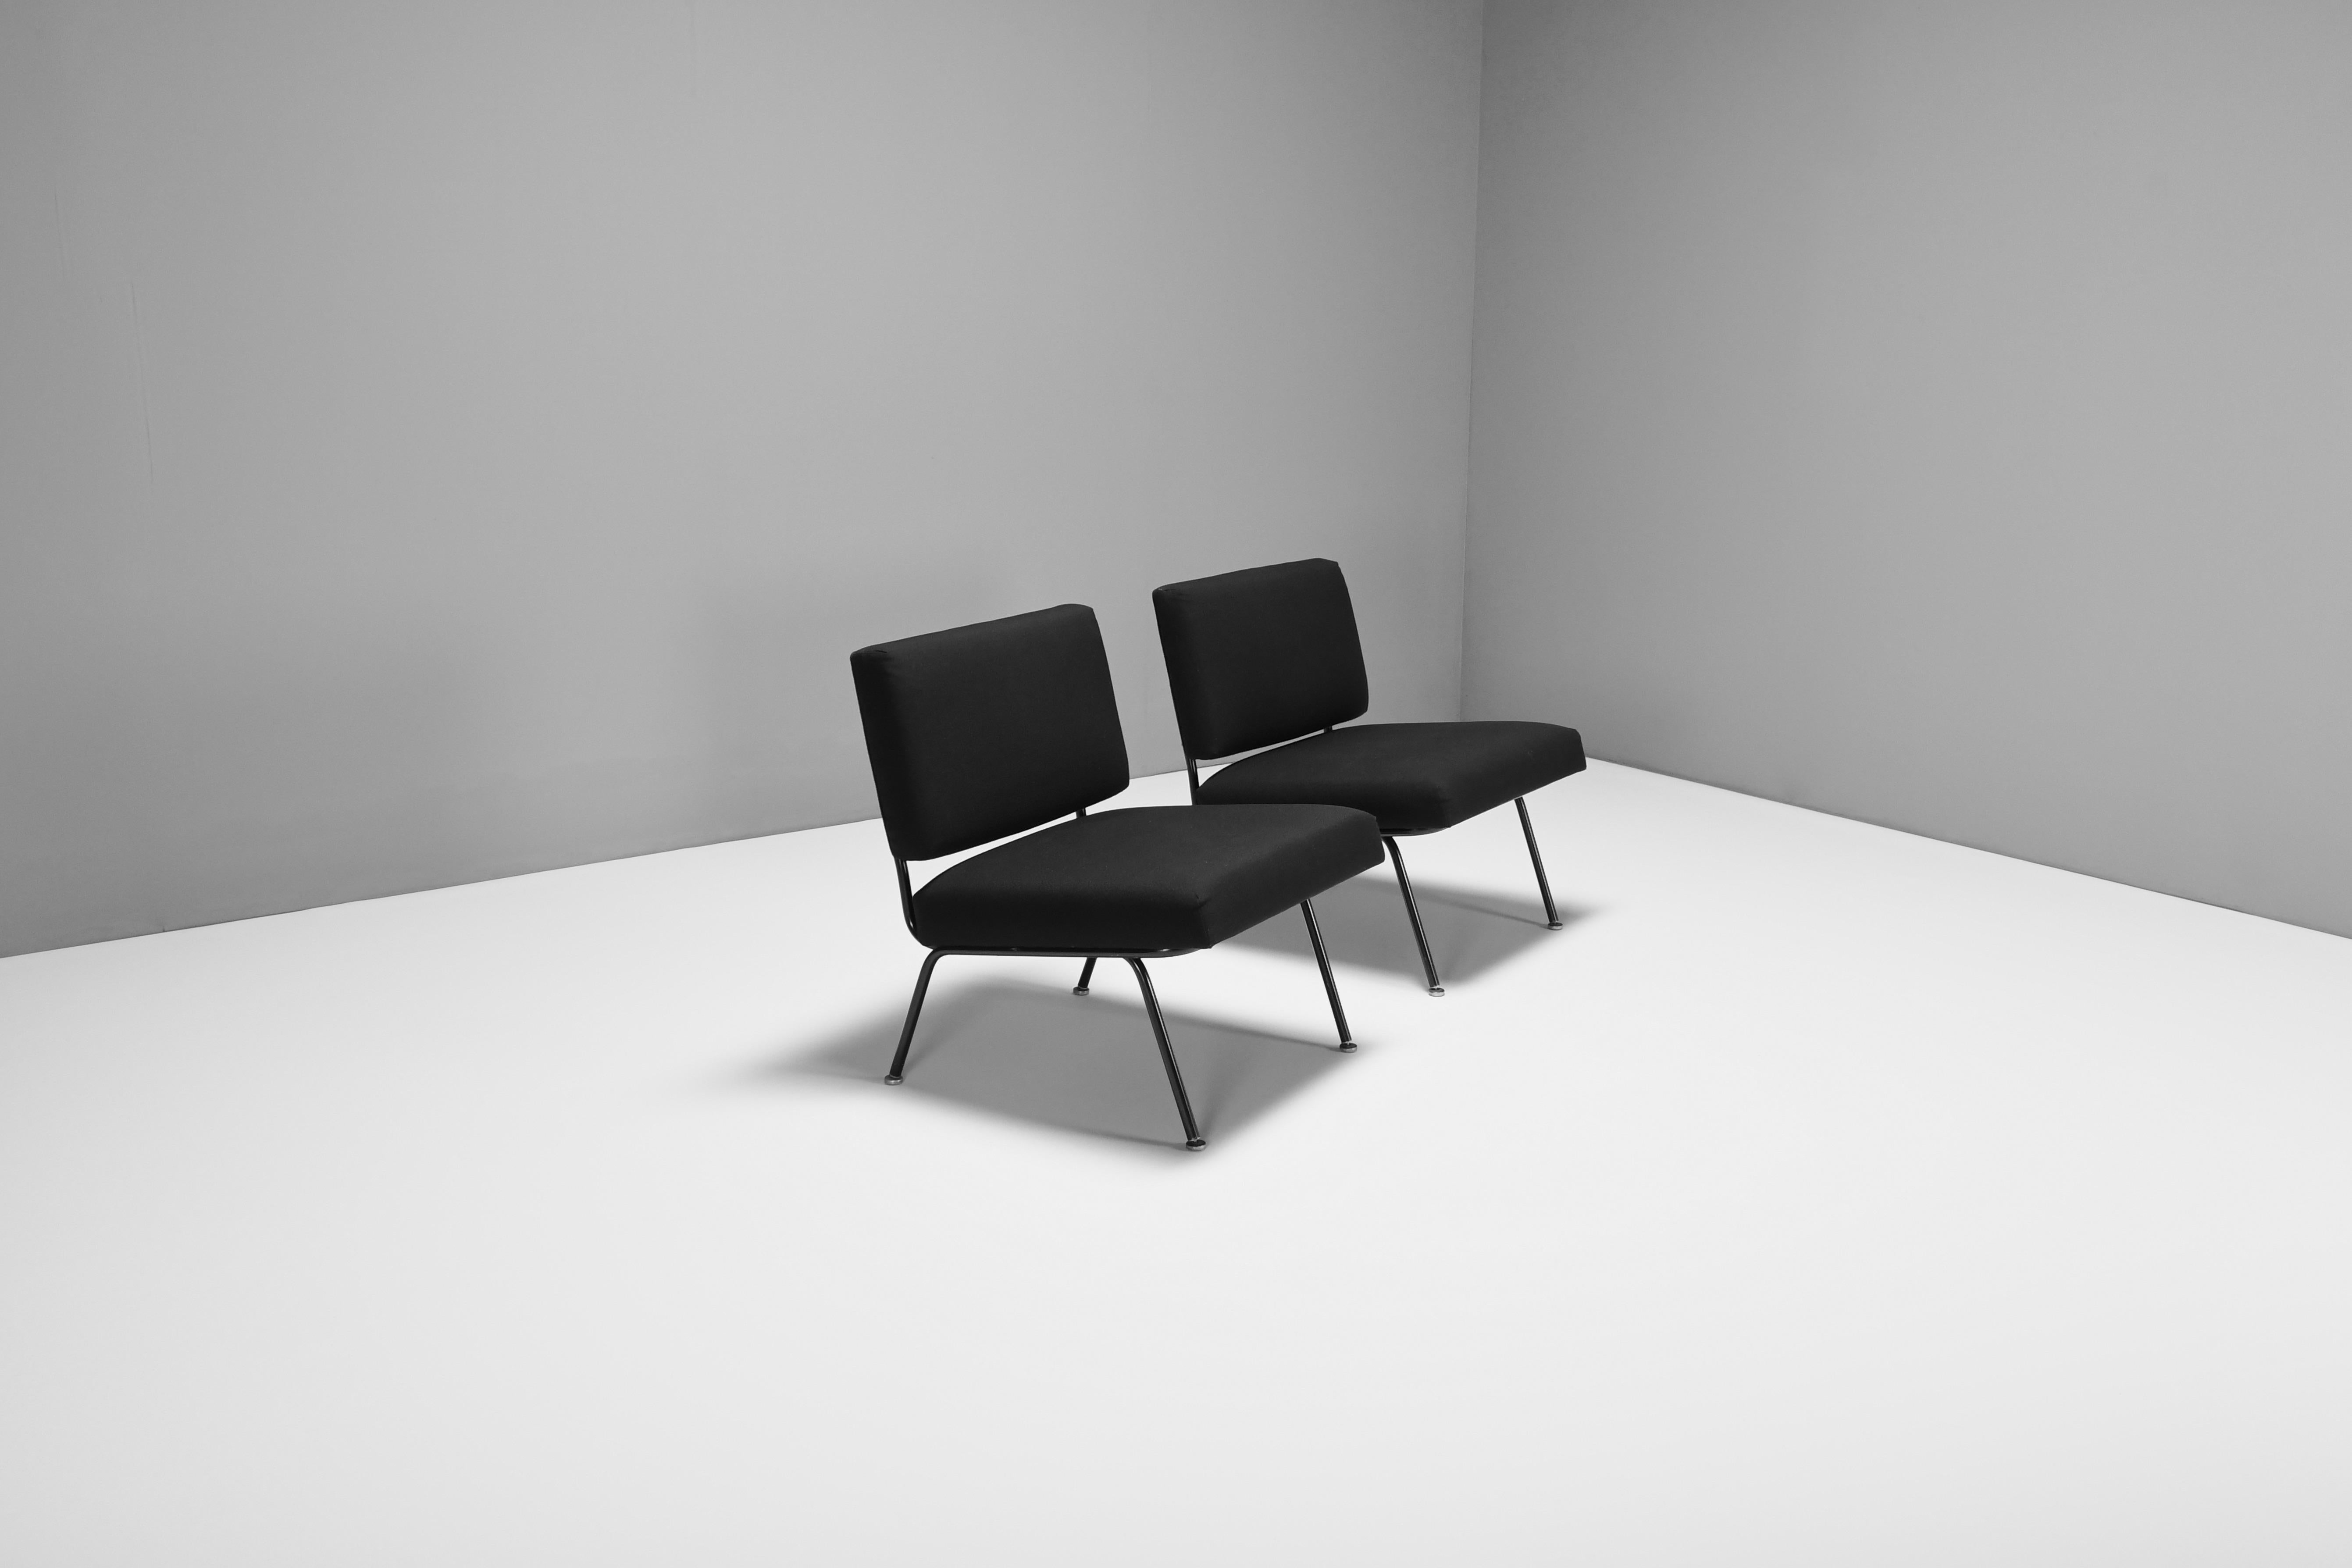 Rare set of model 31 lounge chairs in very good condition.

Designed by Florence Knoll in 1954

Manufactured by Knoll International 

These minimalist lounge chairs have a black lacquered tubular frame with the original aluminum glides.

The chairs